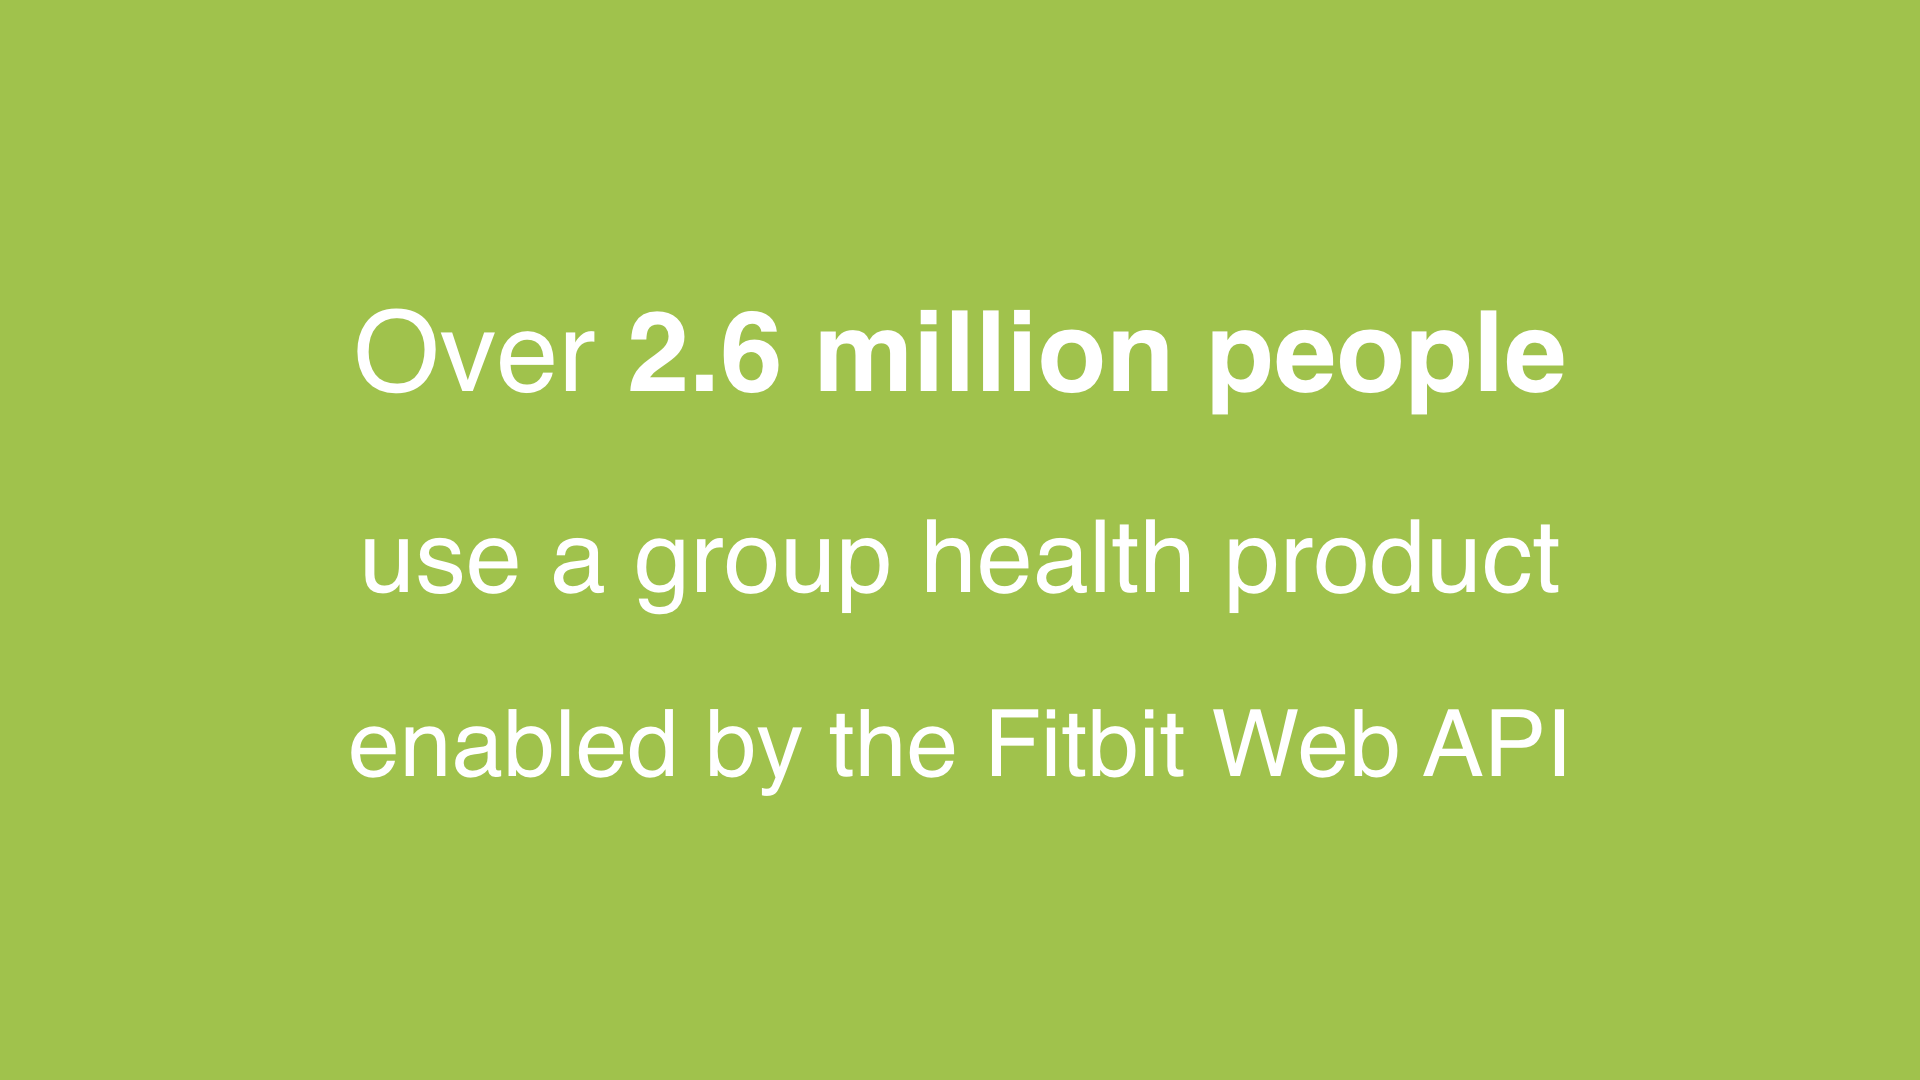 Text: Over 2.6 million people use a group health product enabled by the Fitbit Web API